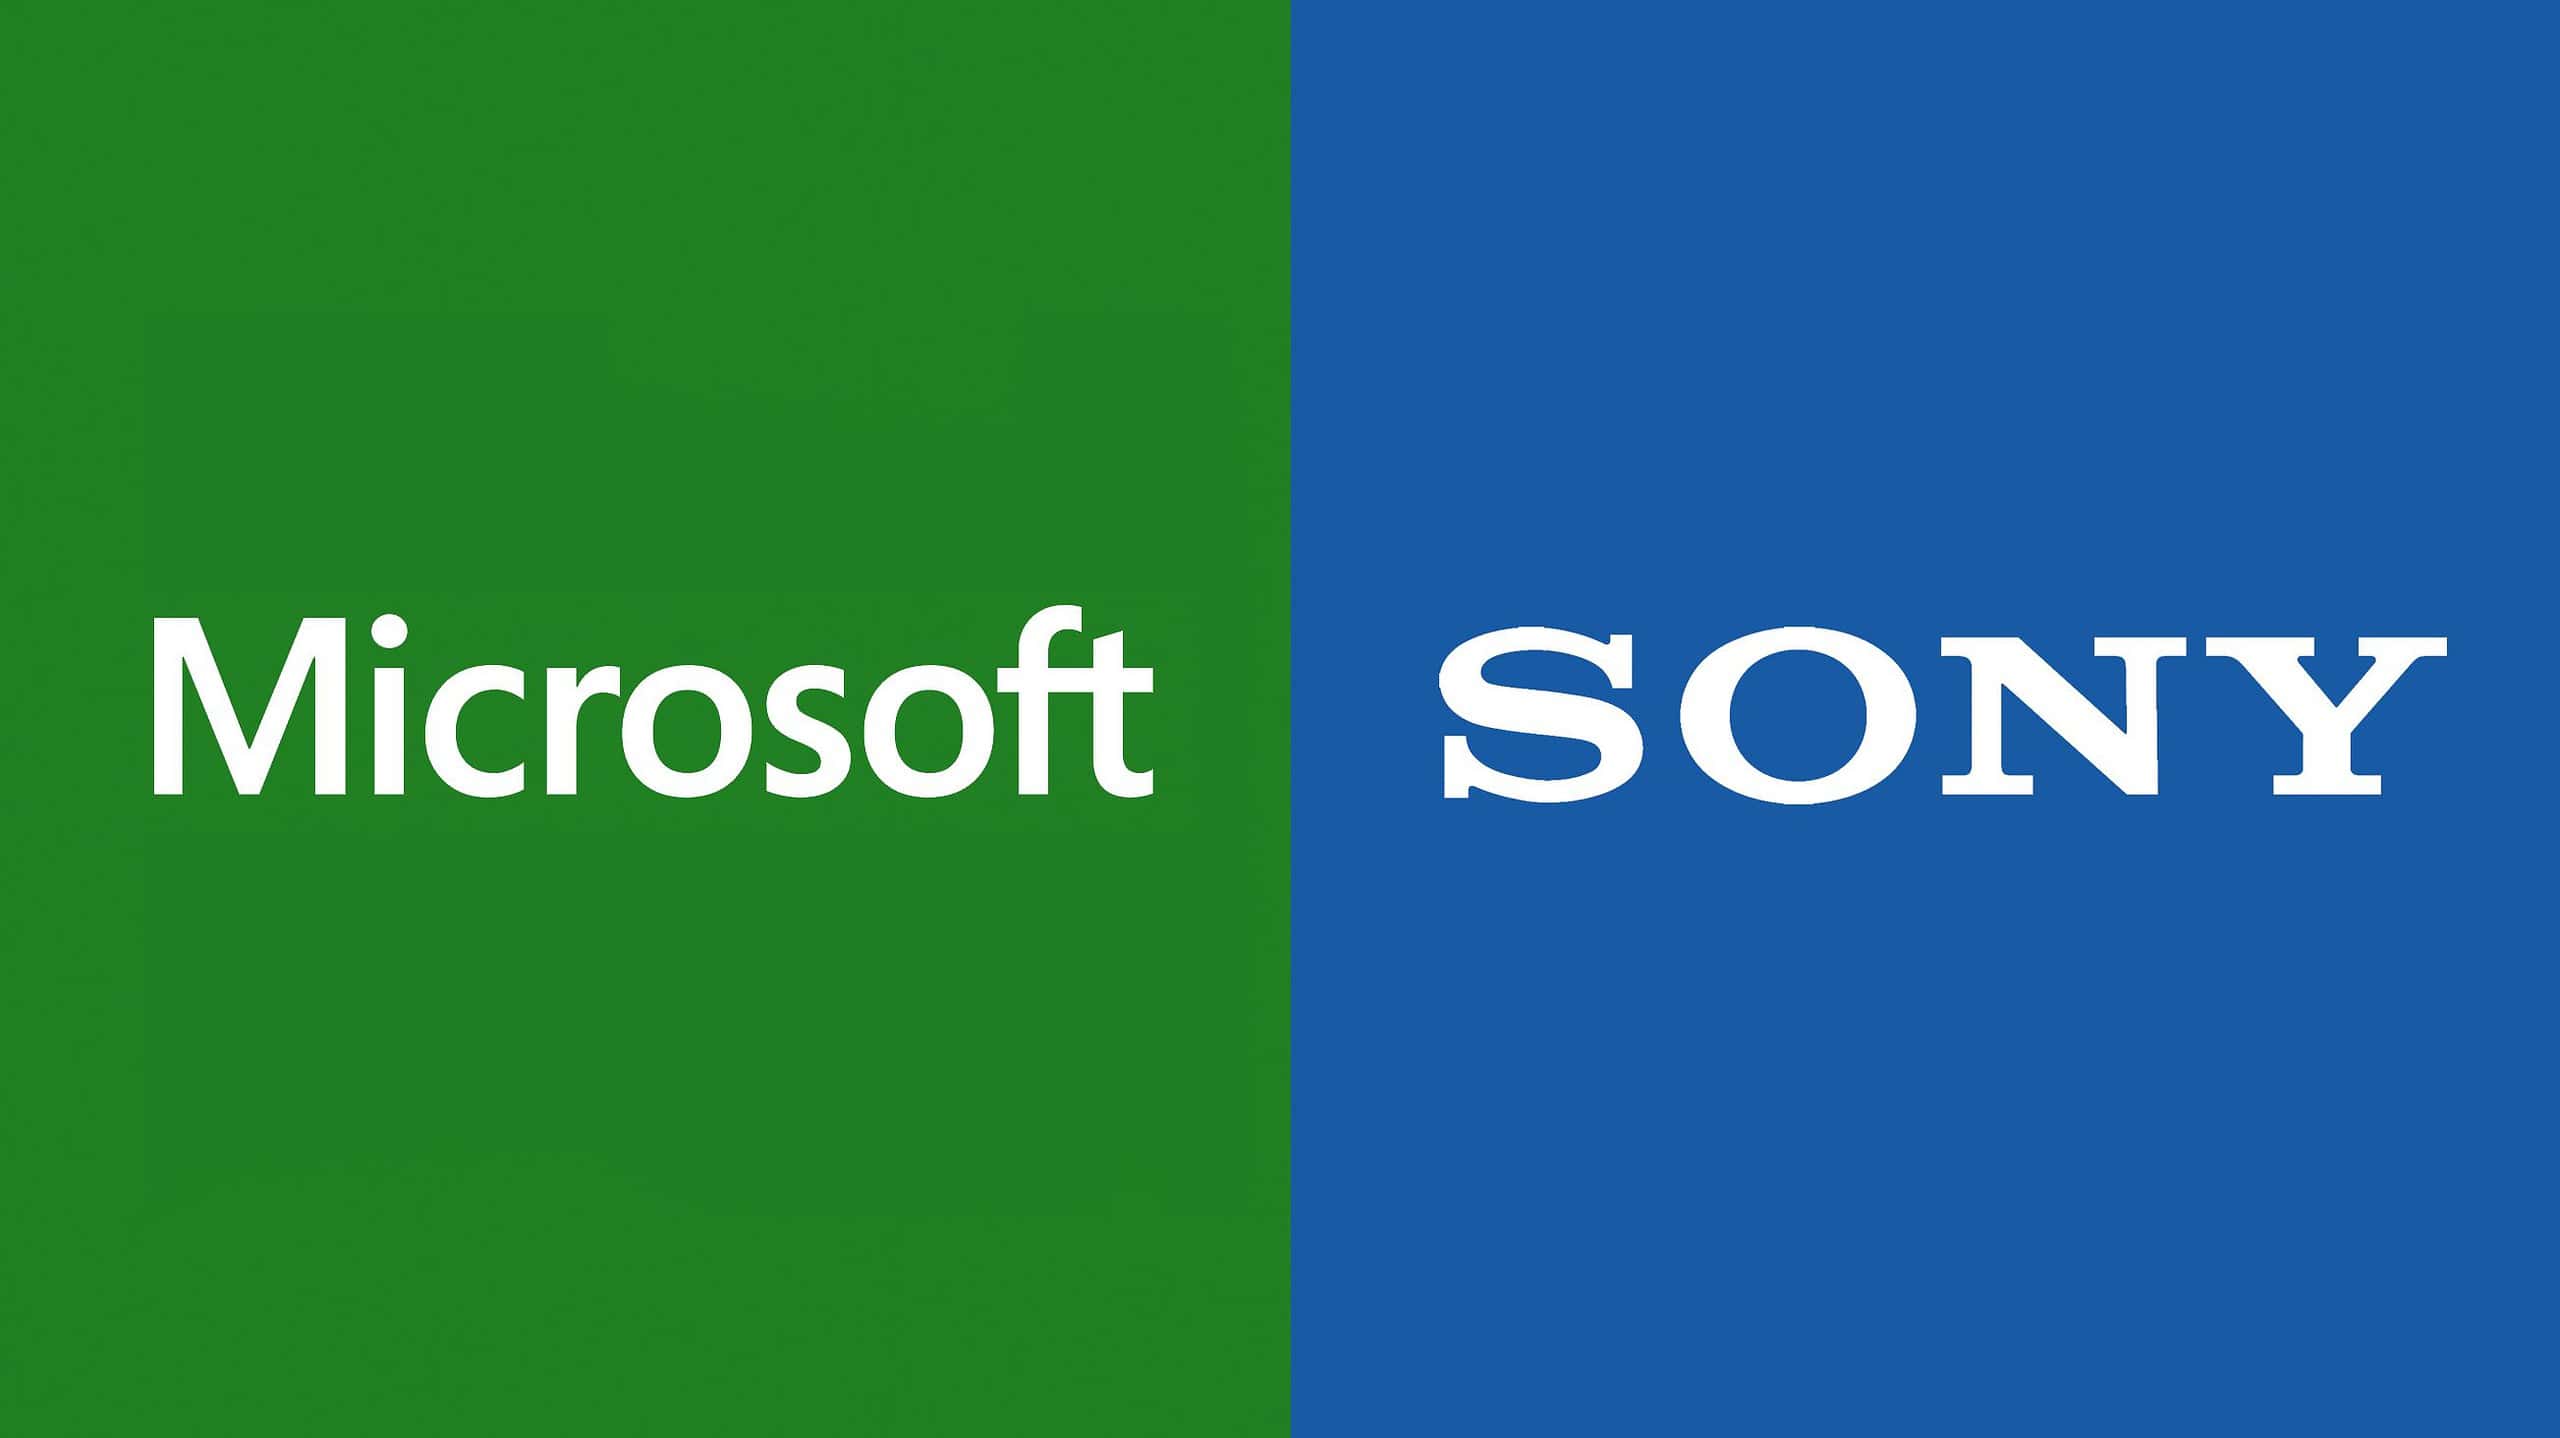 Sony reportedly told EU regulators Microsoft is “unwilling” to offer COD parity